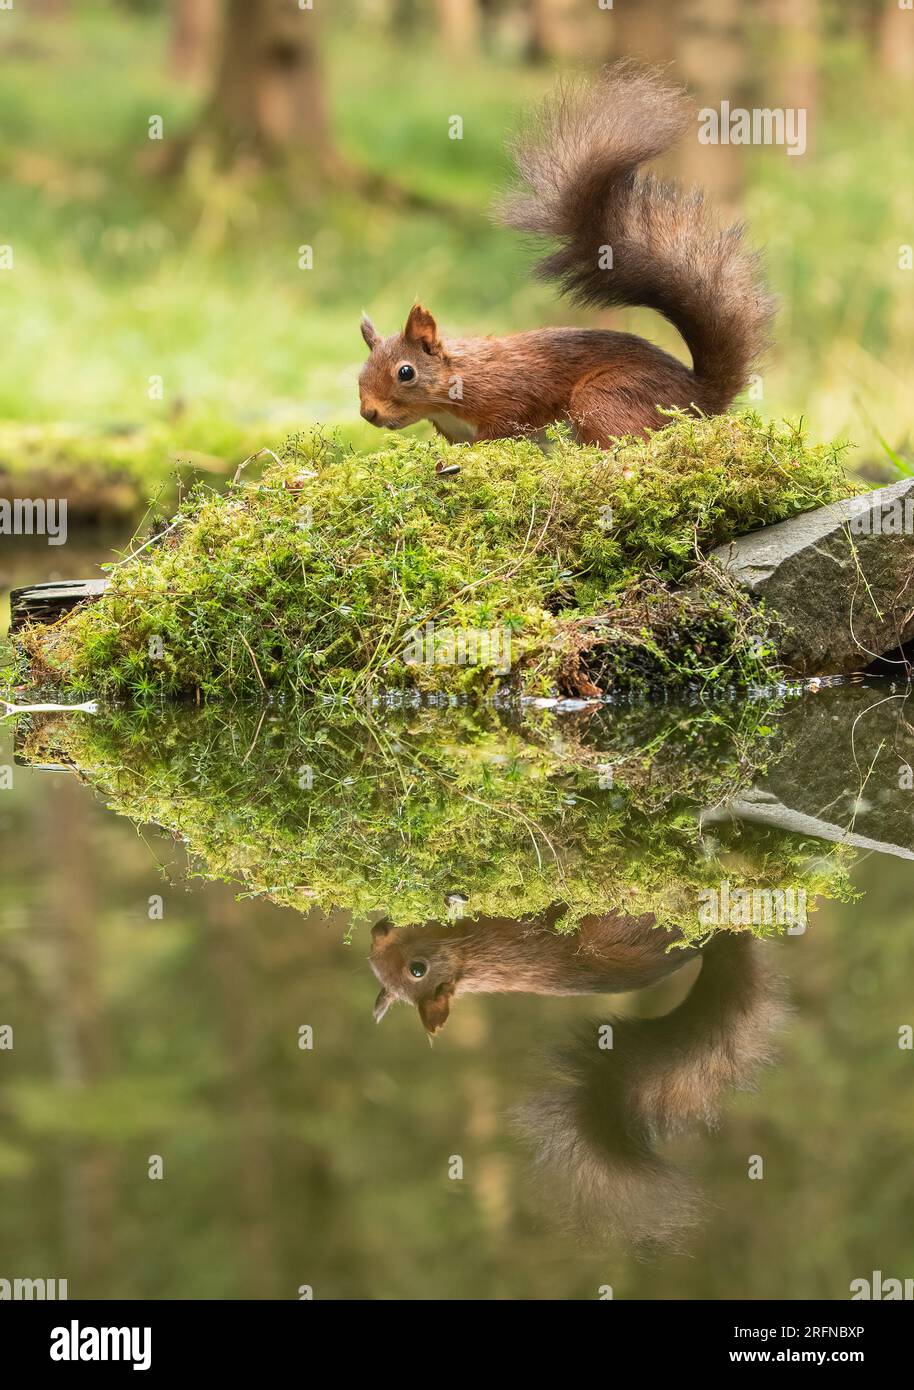 A classic shot of a Red Squirrel (Sciuris vulgaris) with his bushy tail . A perfect mirror image reflection in the water below. Yorkshire, UK Stock Photo